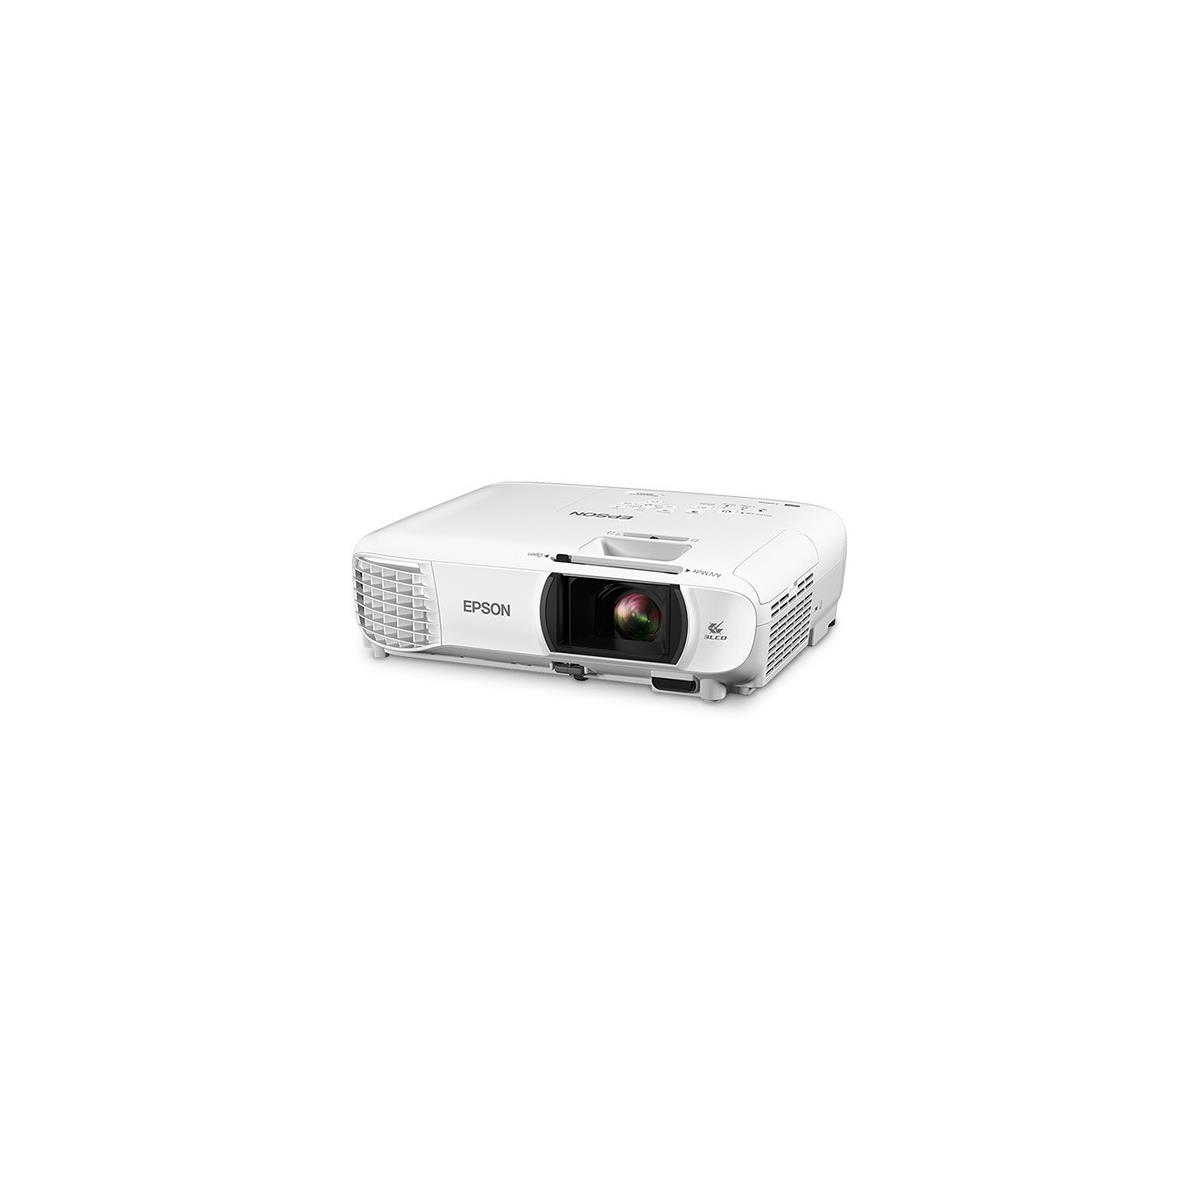 Epson Home Cinema 1060 Full HD 3LCD Home Theater Projector -  V11H849020